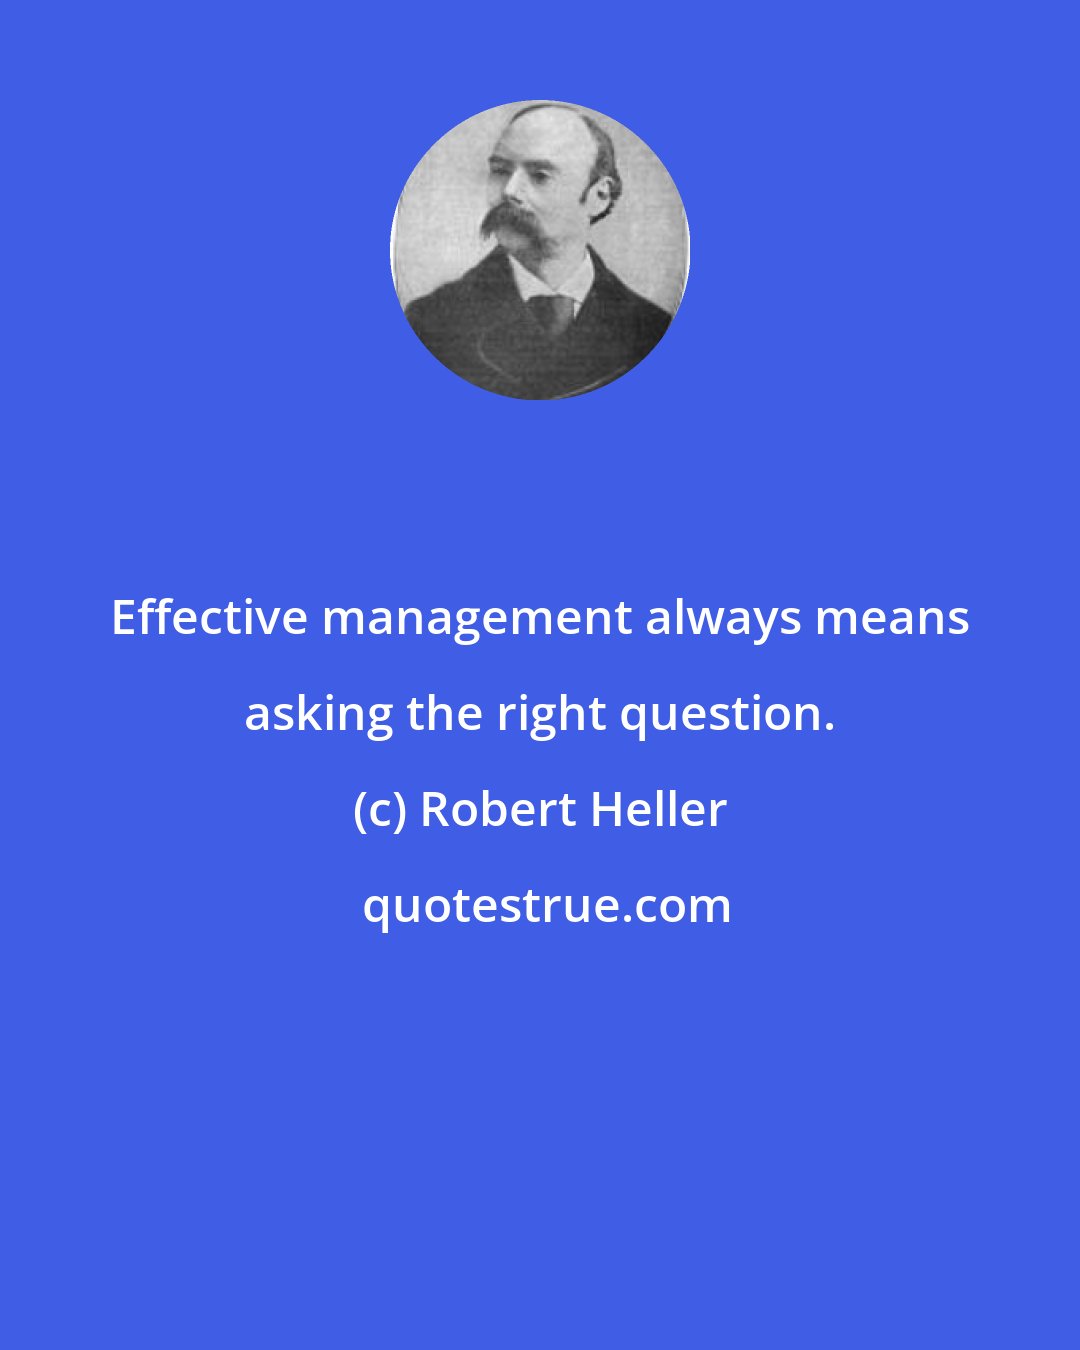 Robert Heller: Effective management always means asking the right question.